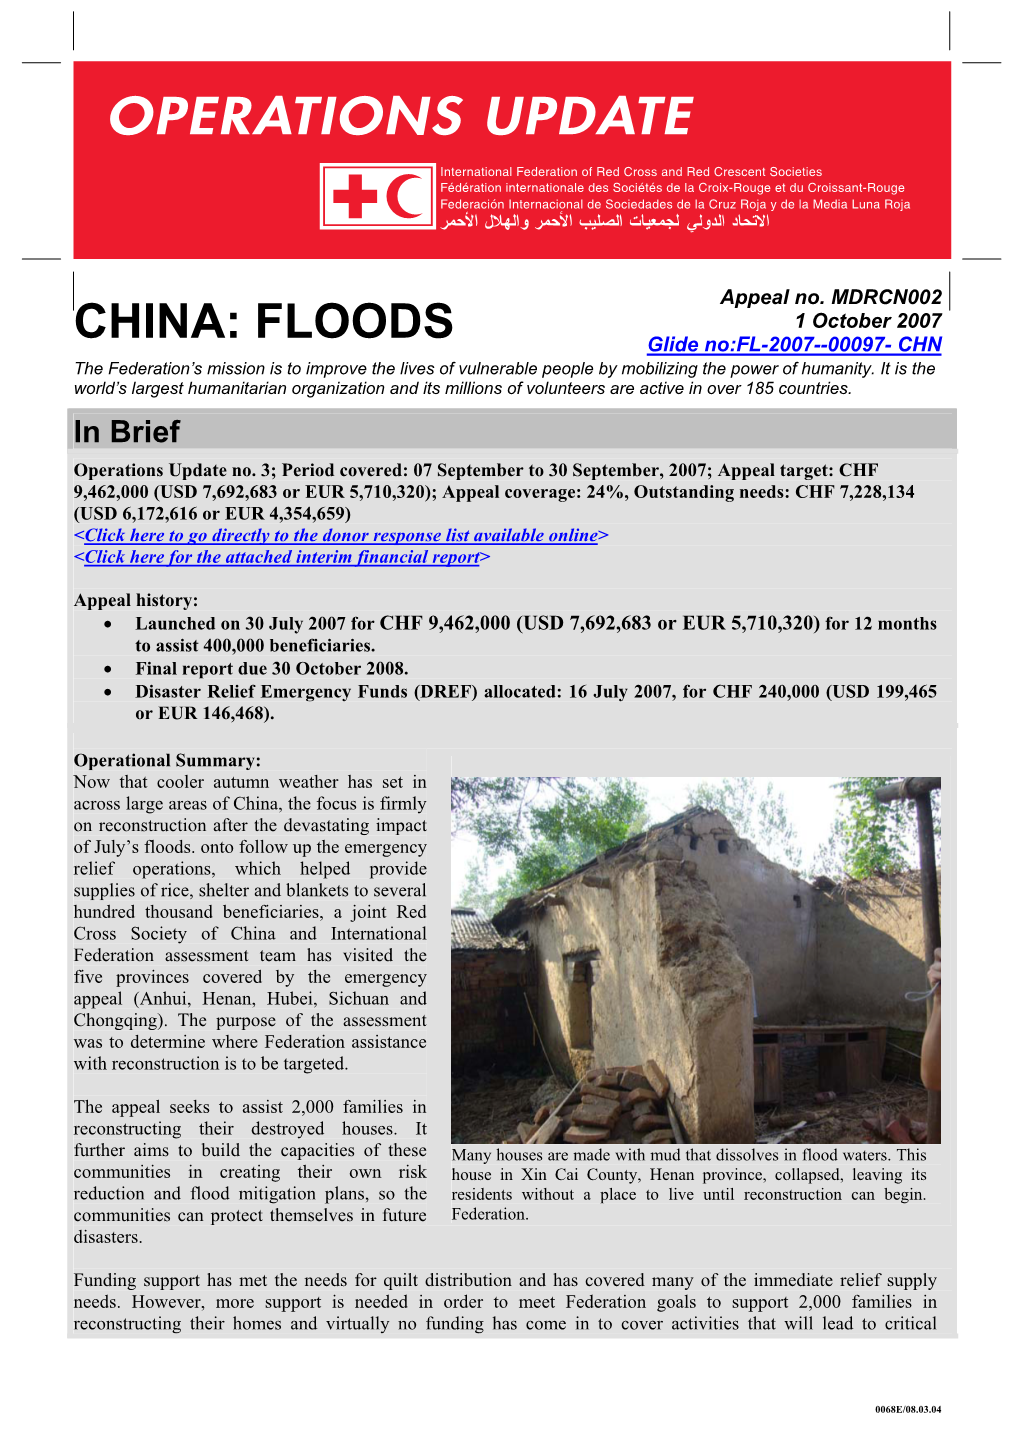 CHINA: FLOODS Glide No:FL-2007--00097- CHN the Federation’S Mission Is to Improve the Lives of Vulnerable People by Mobilizing the Power of Humanity